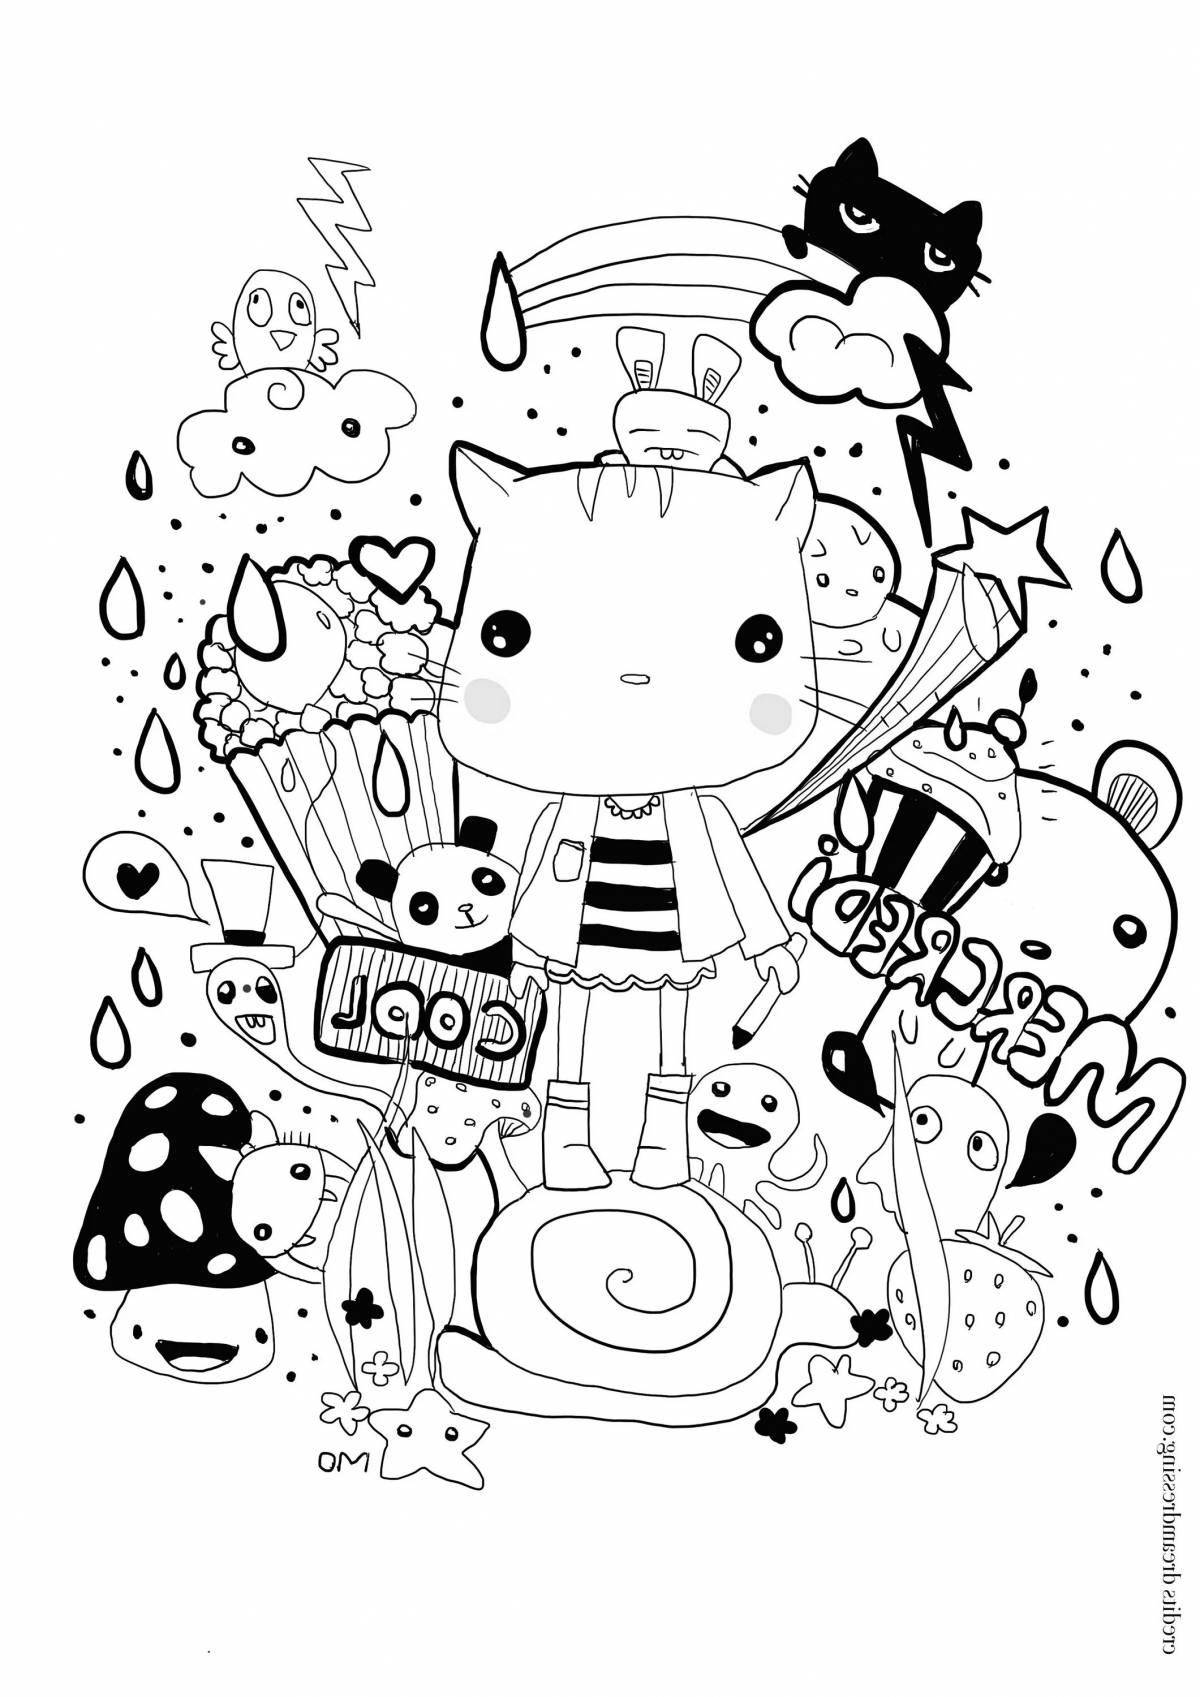 Quirky kawaii cat coloring page